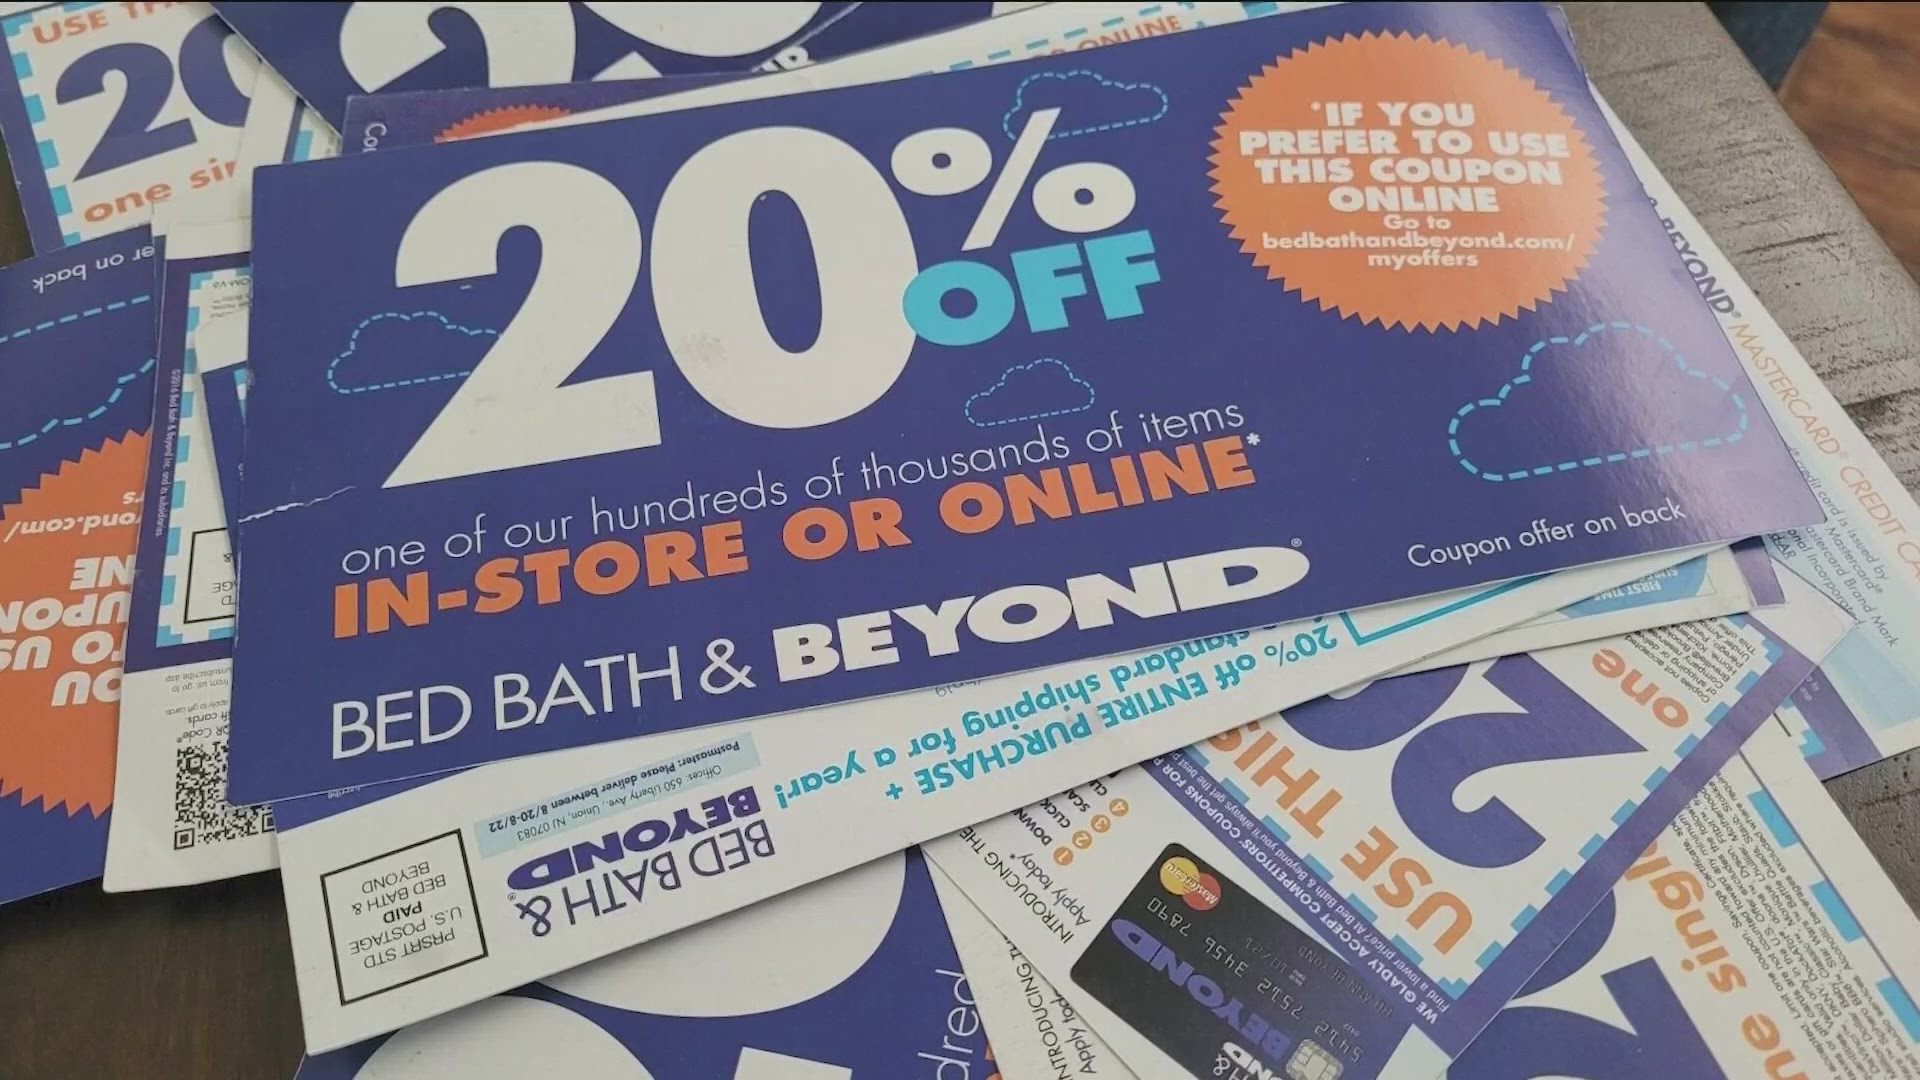 Bed Bath & Beyond - Home Ecommerce Marketing Strategy Example.